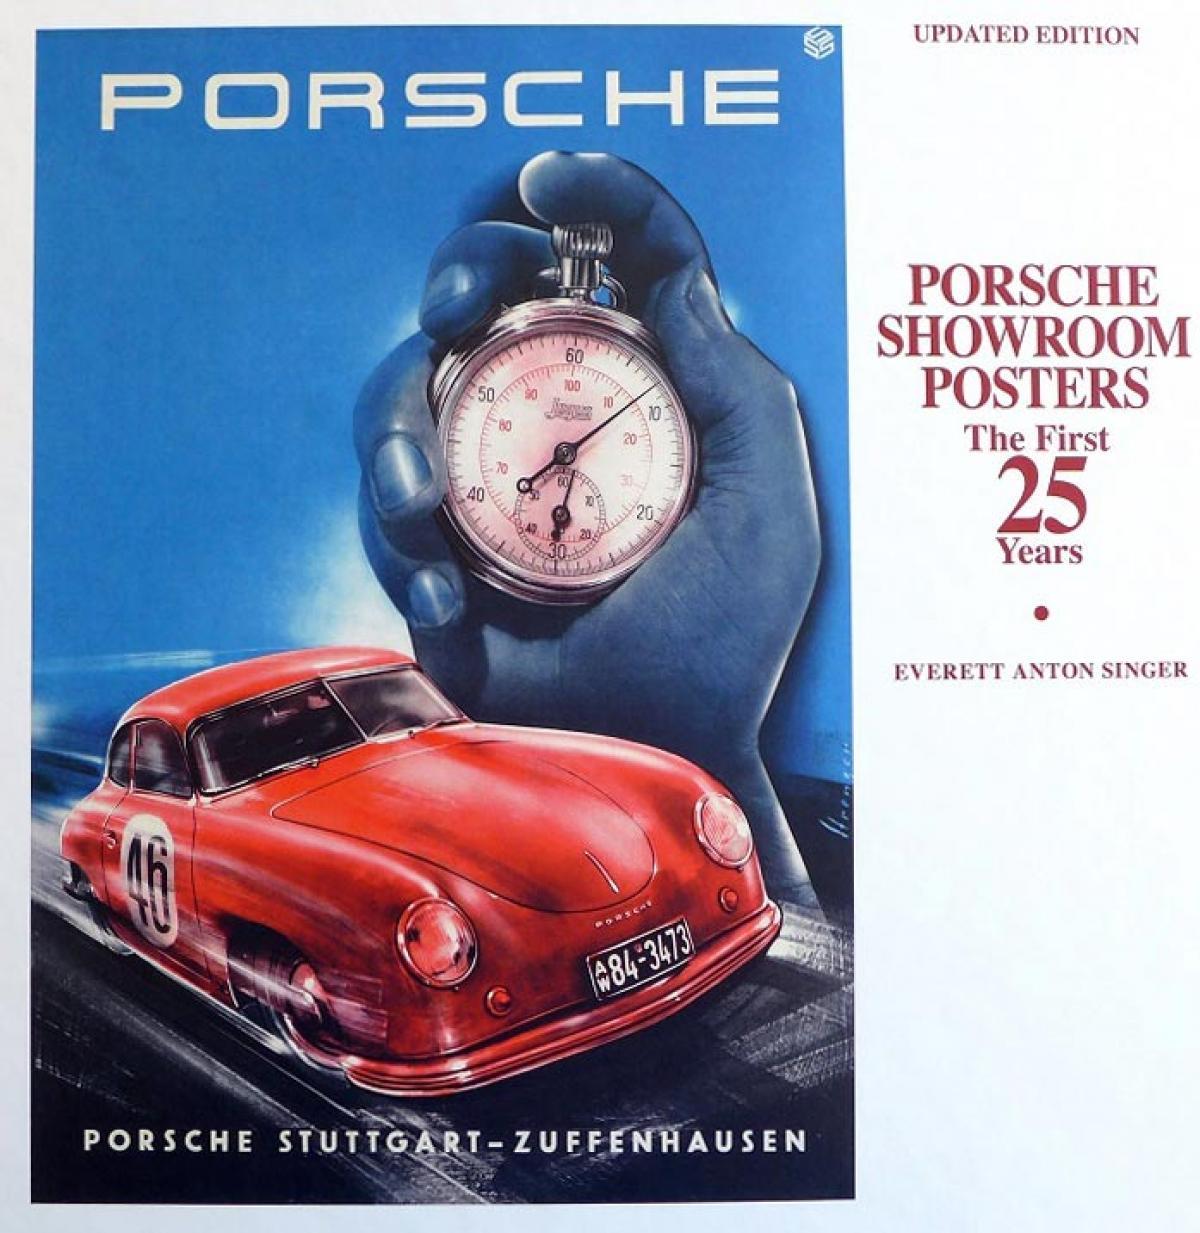 https://mediaassets.pca.org/pages/pca/images/content/porsche-showroom-posters-book-cover.jpg